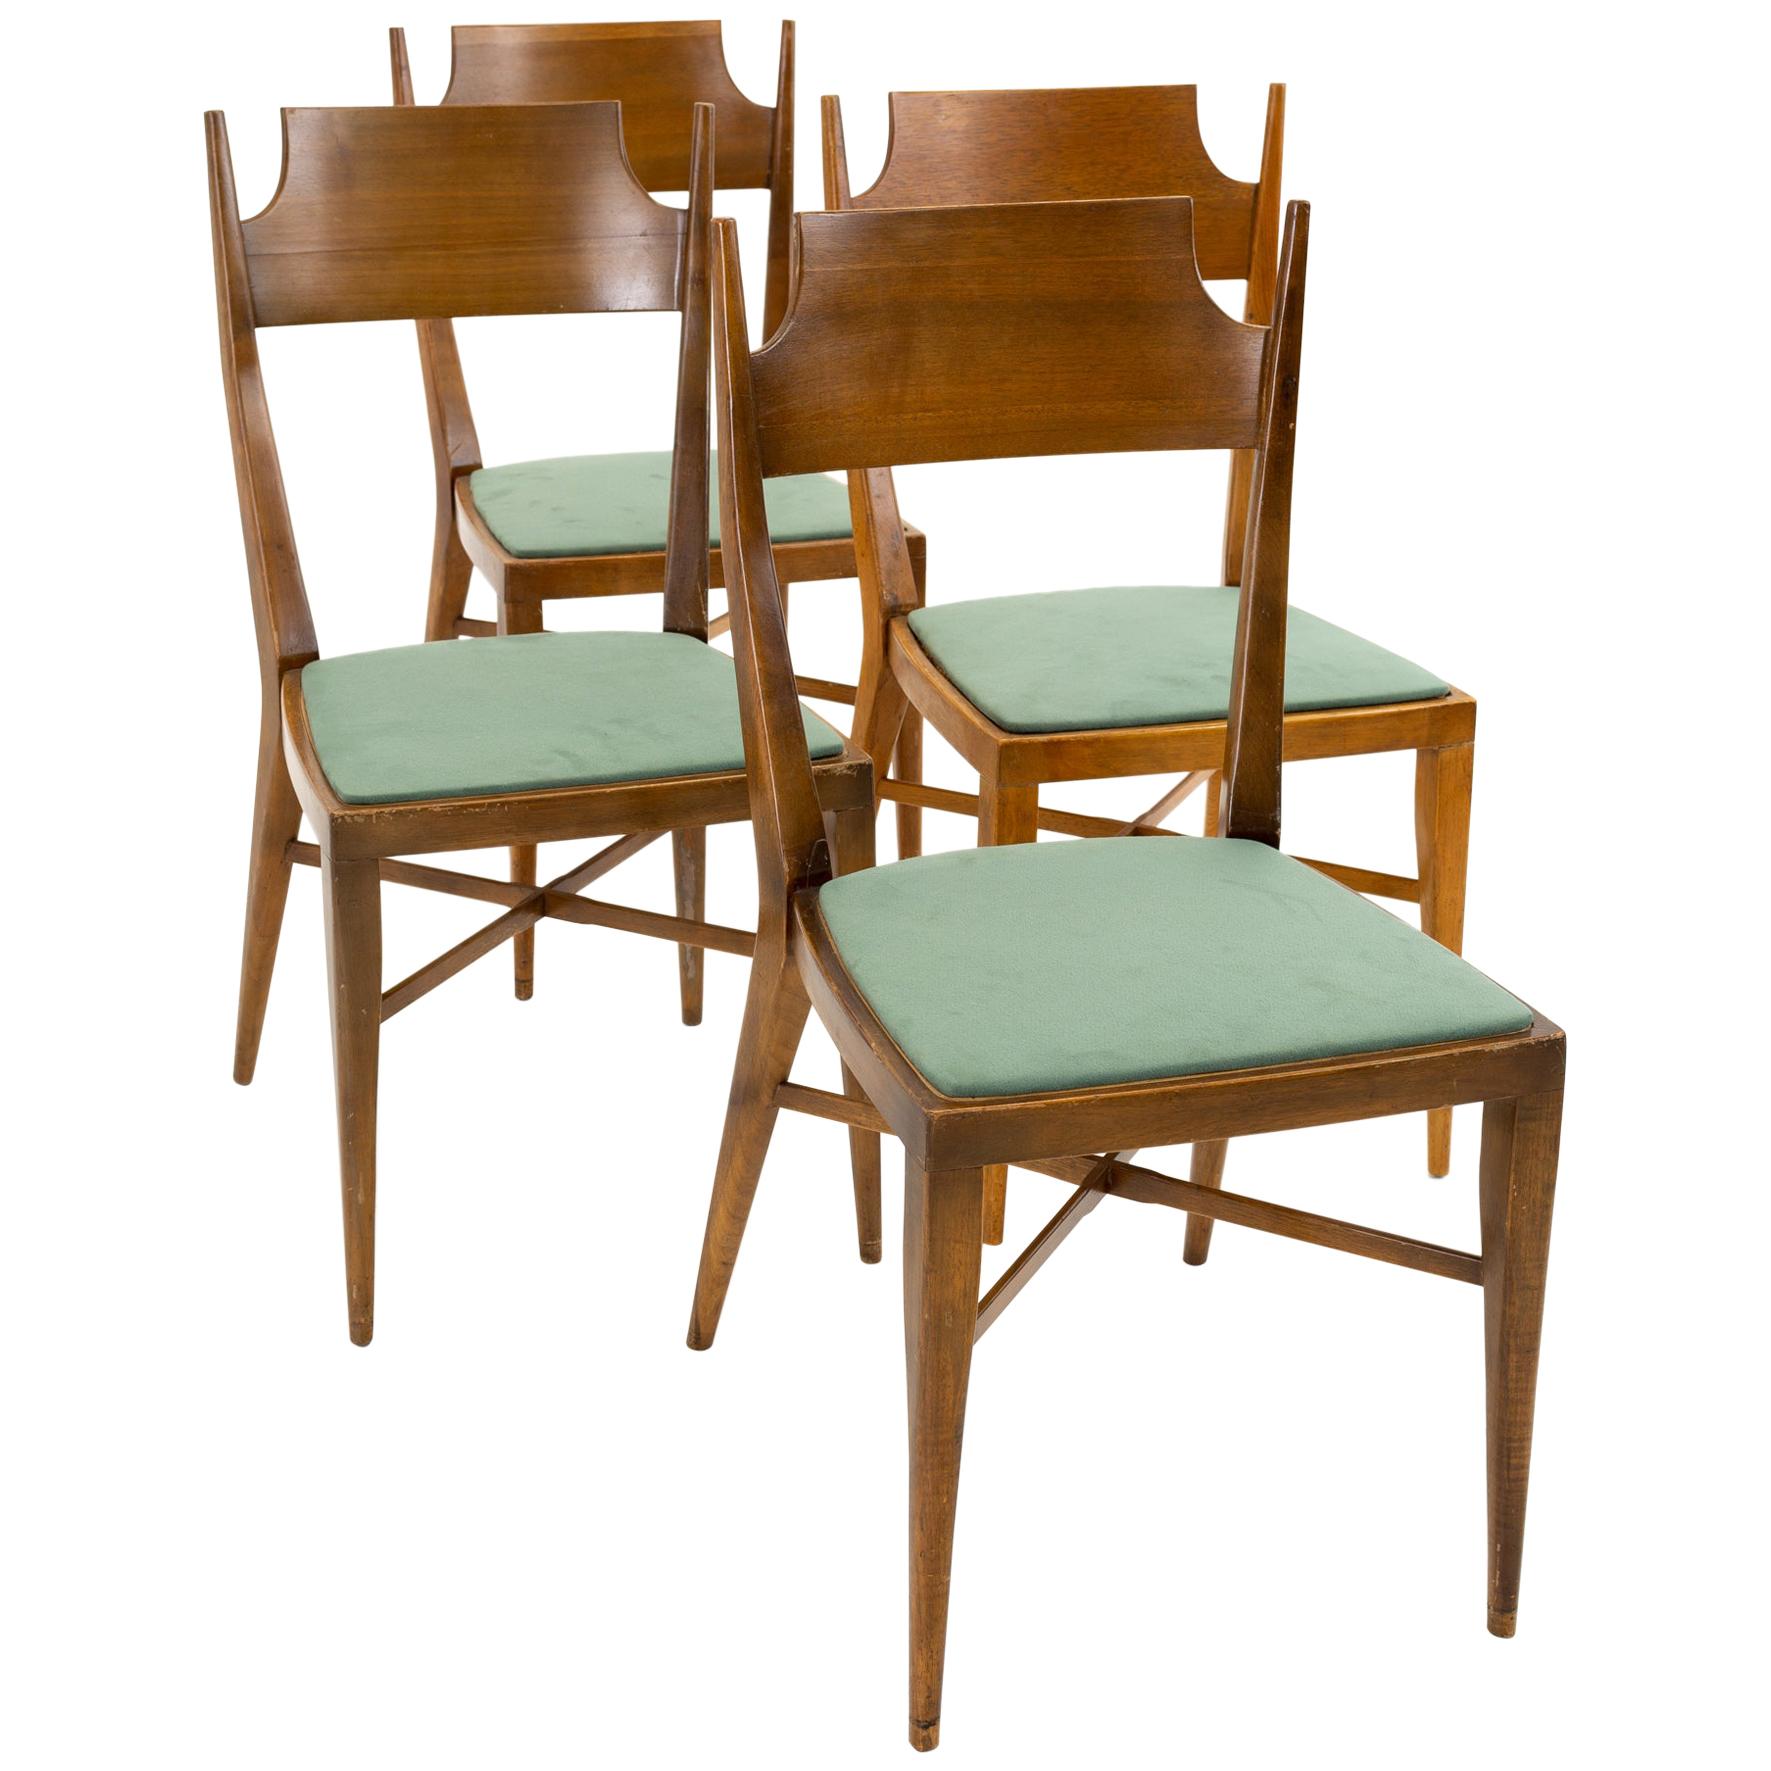 Paul McCobb Mid Century Connoisseur Dining Chairs, Set of 4